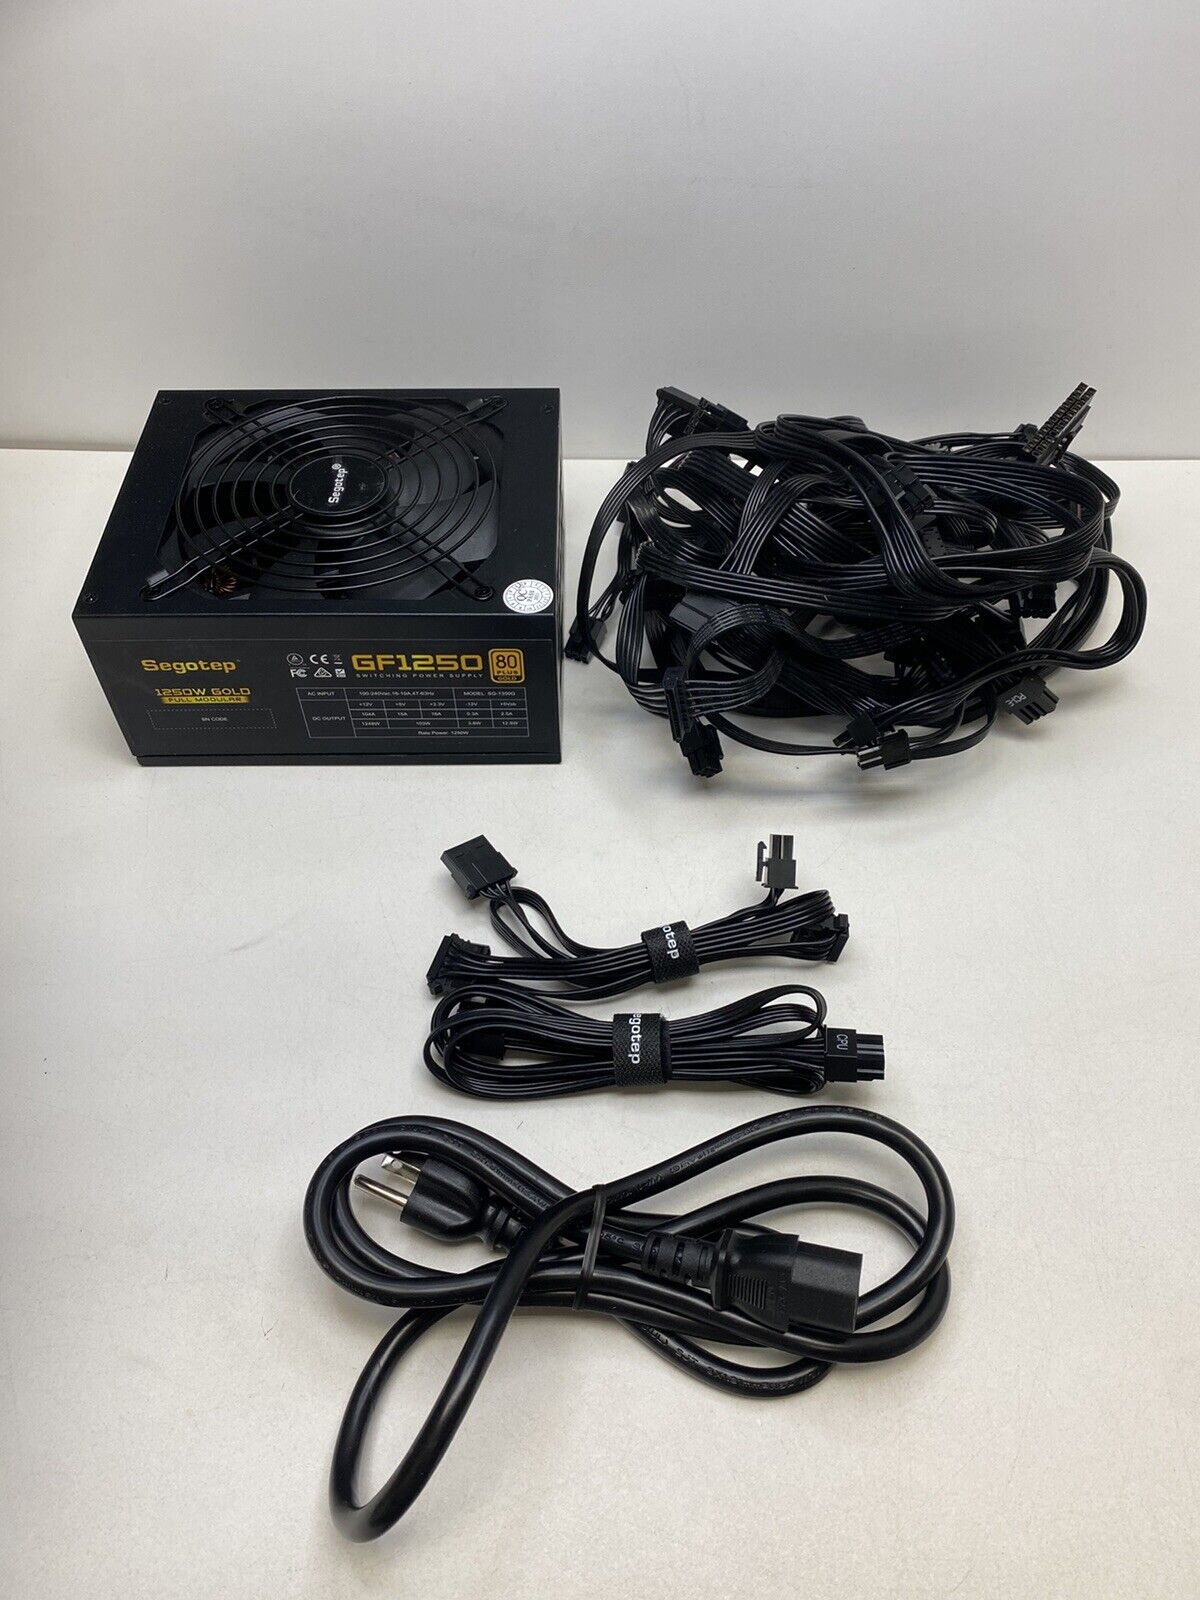 Segotep 1250W Power Supply Fully Modular 80+ Gold PSU with 140Mm Smart Fan